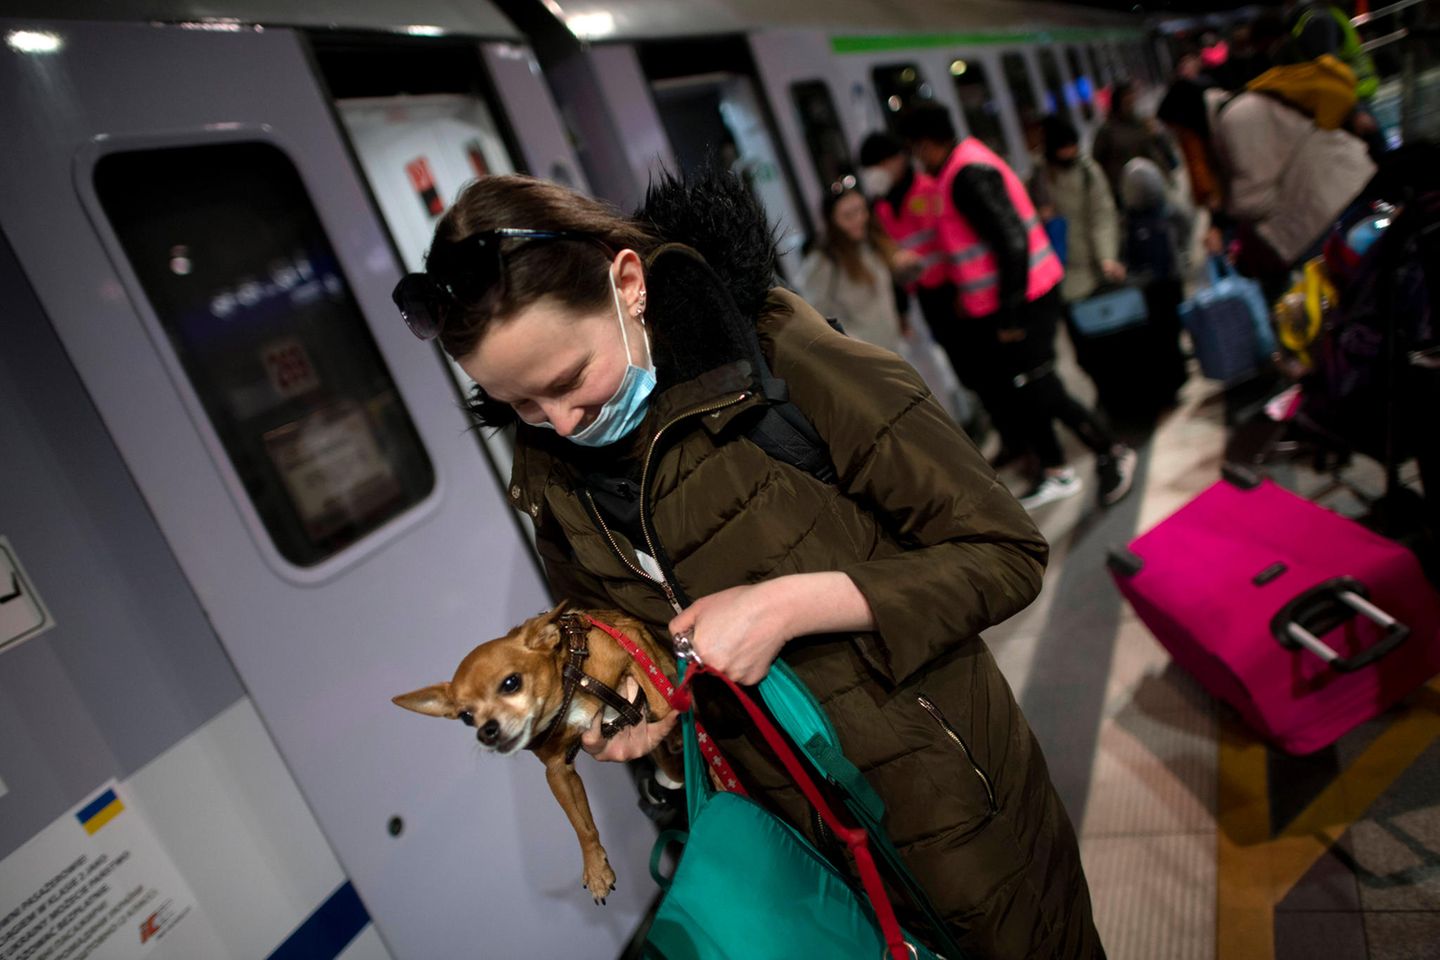 A woman with a small dog in her arms walks along a platform